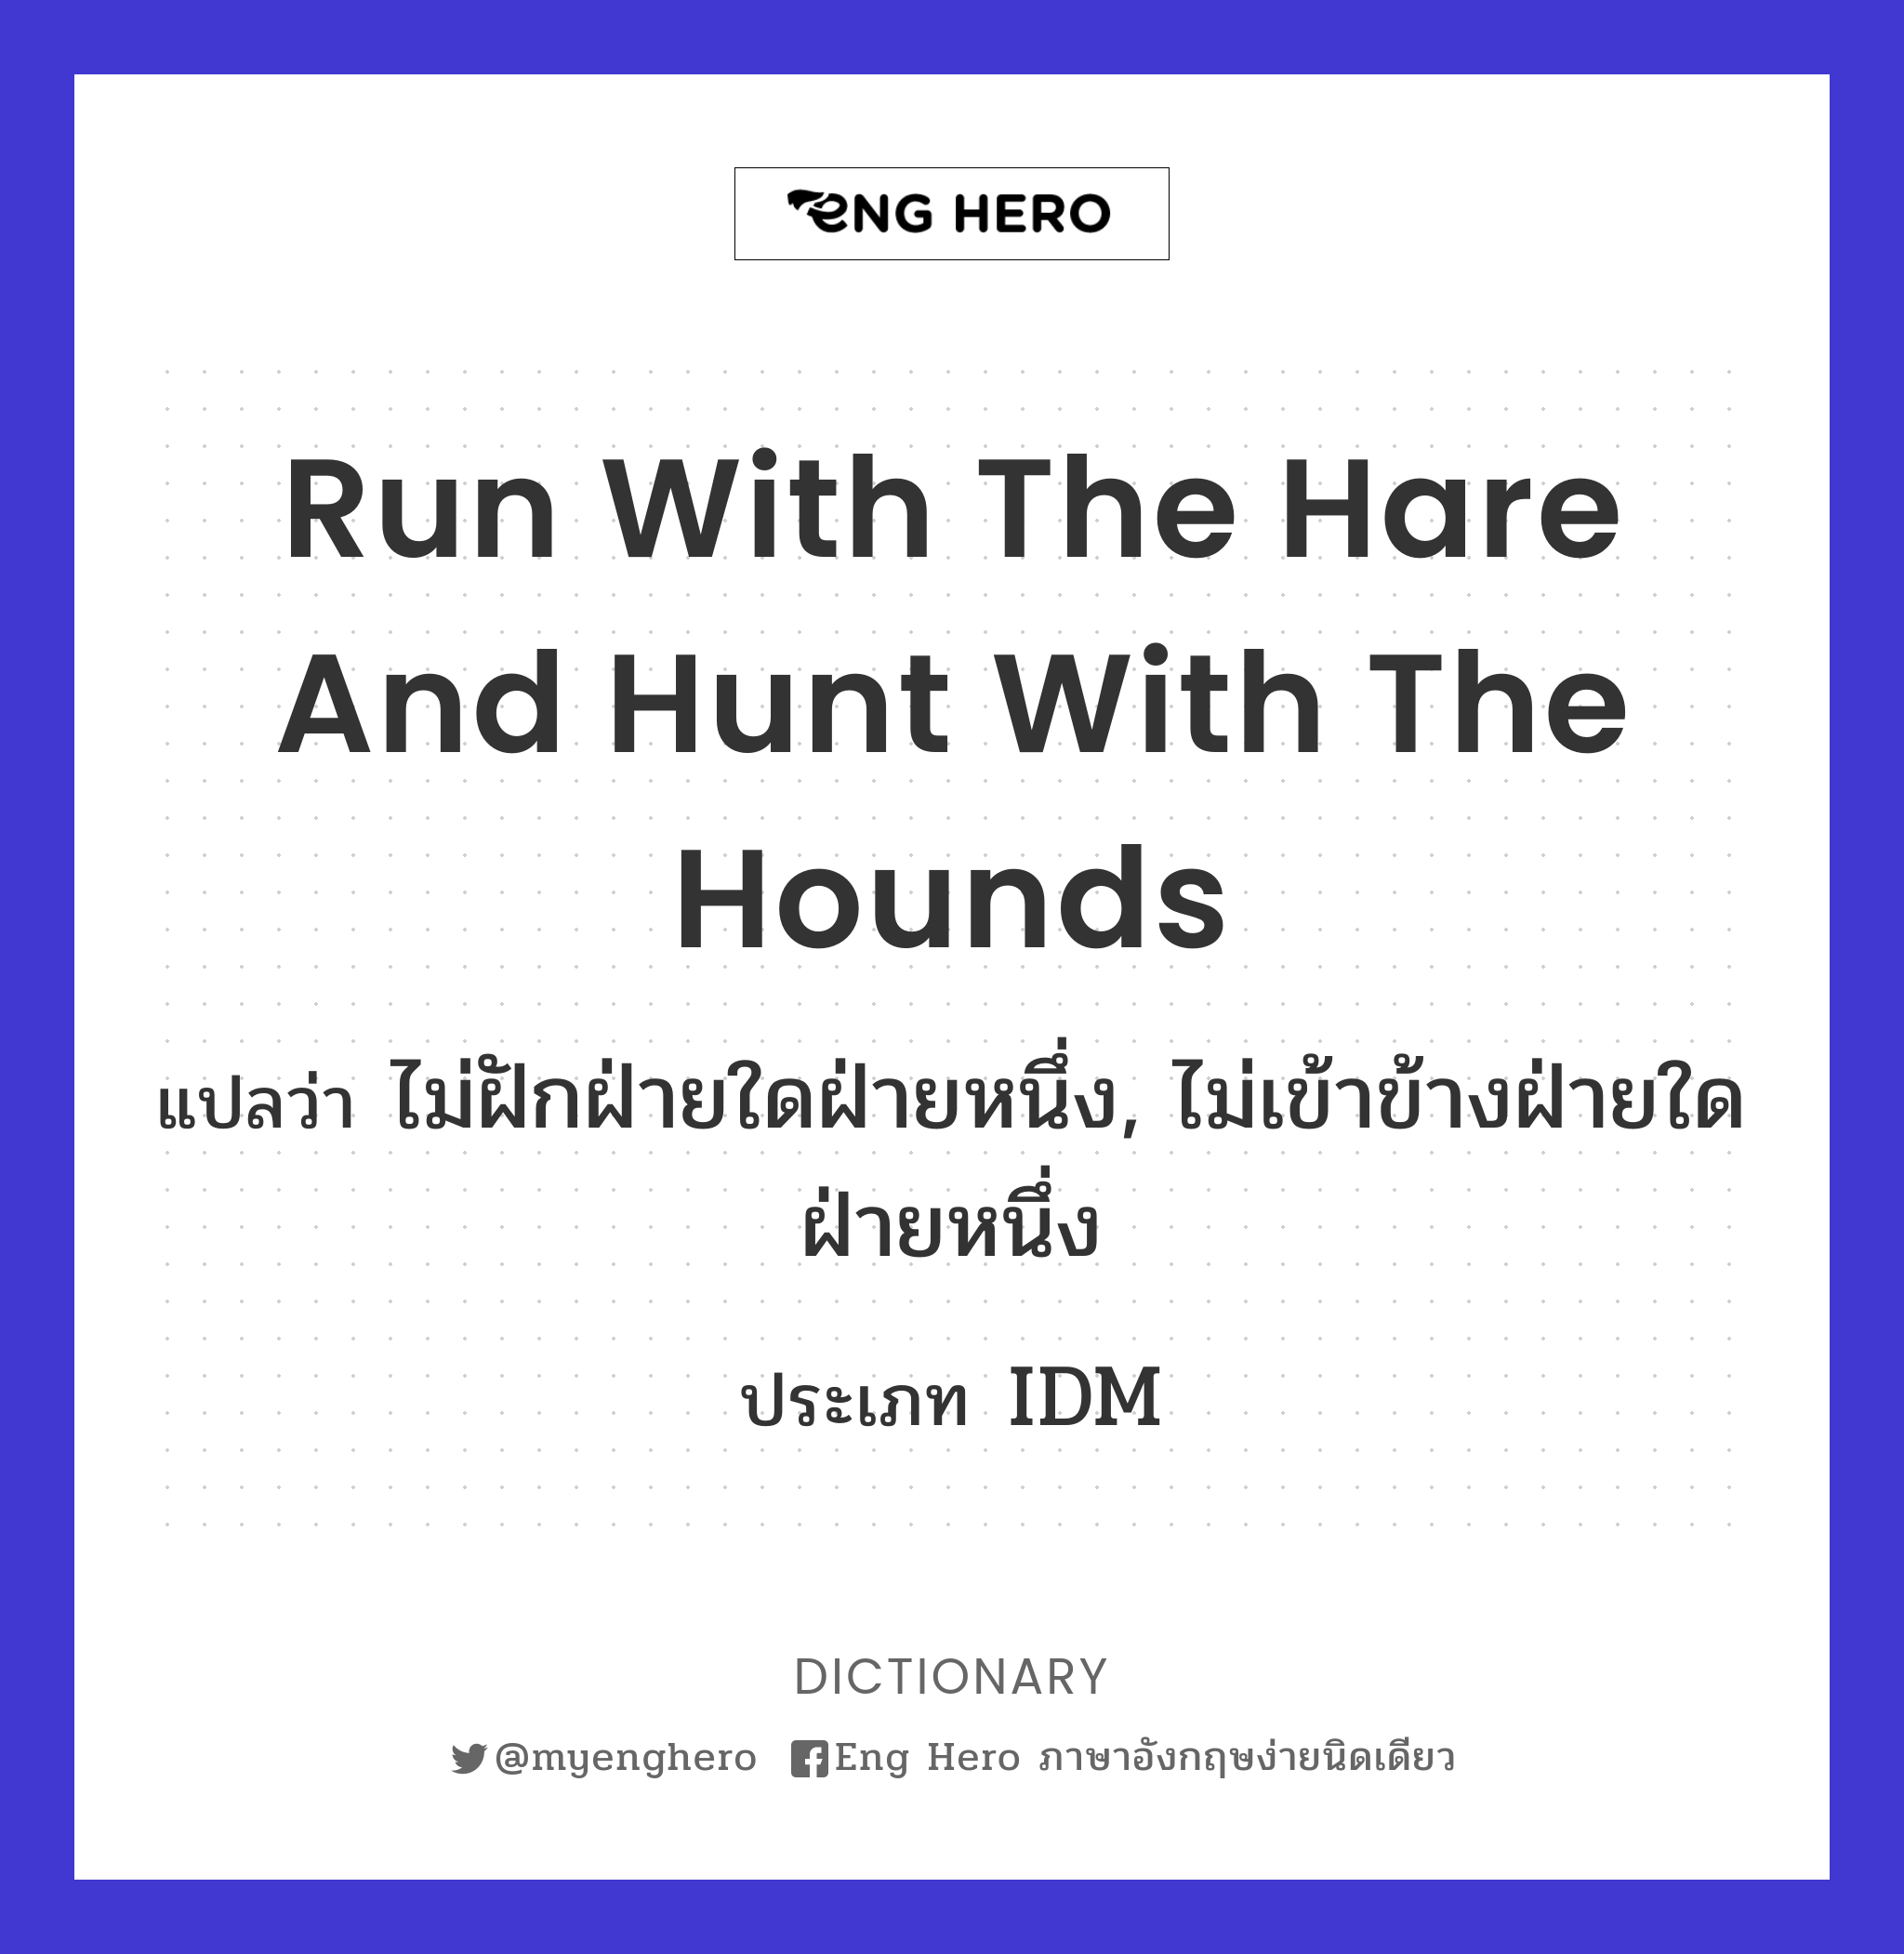 run with the hare and hunt with the hounds